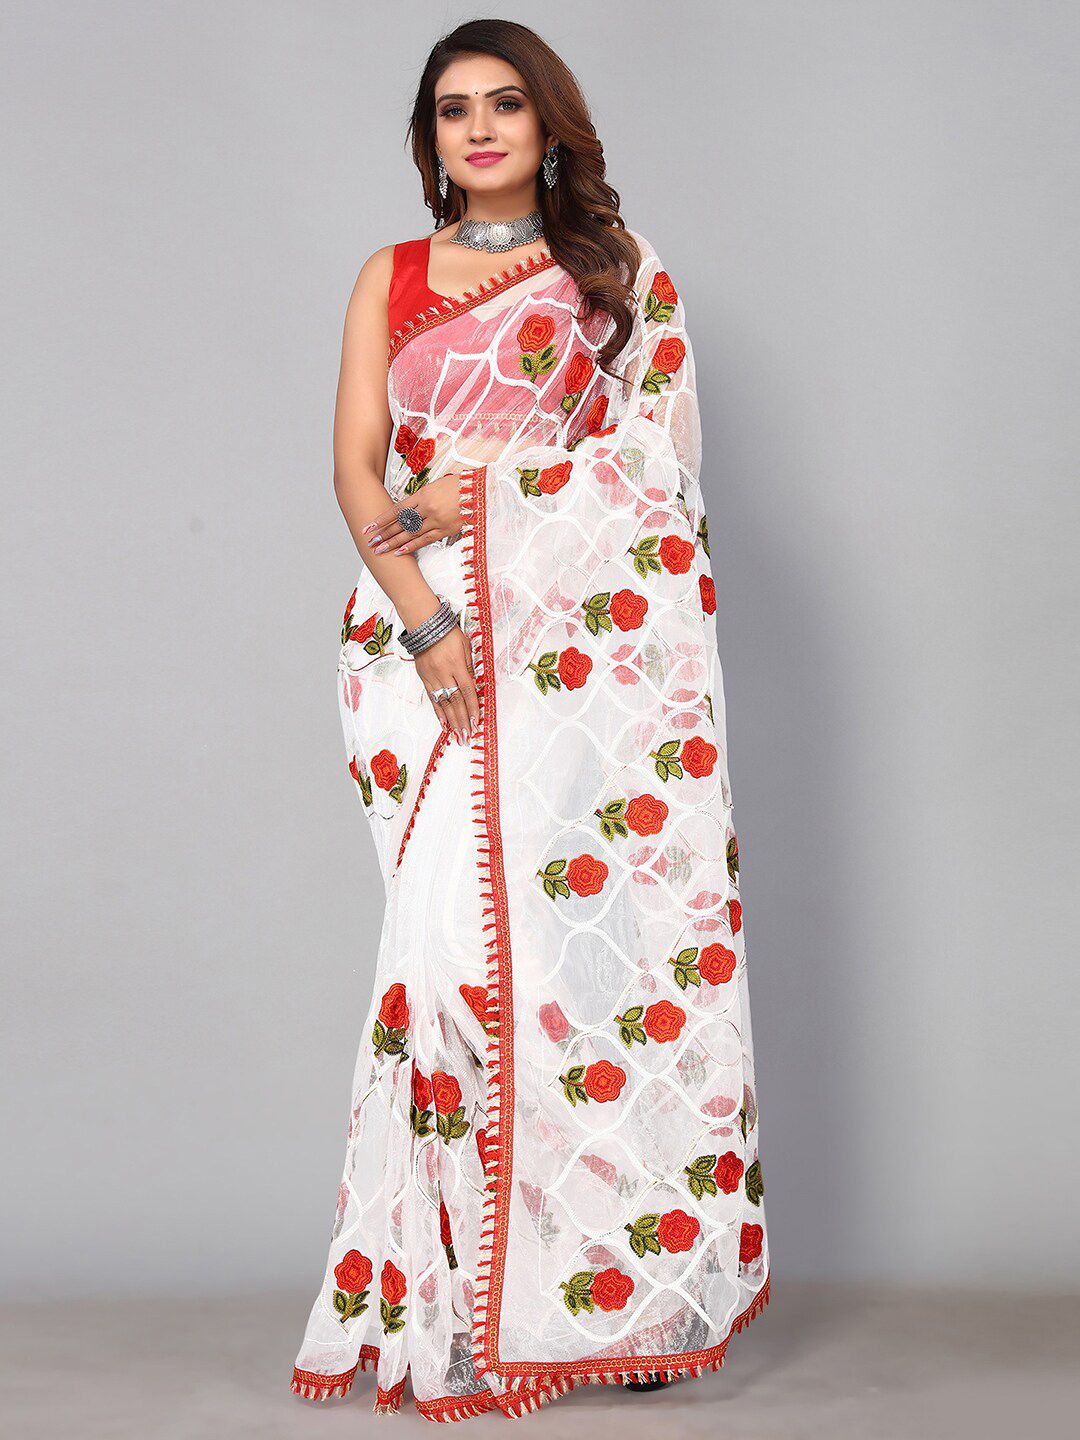 SIRIL Floral Embroidered Saree Price in India